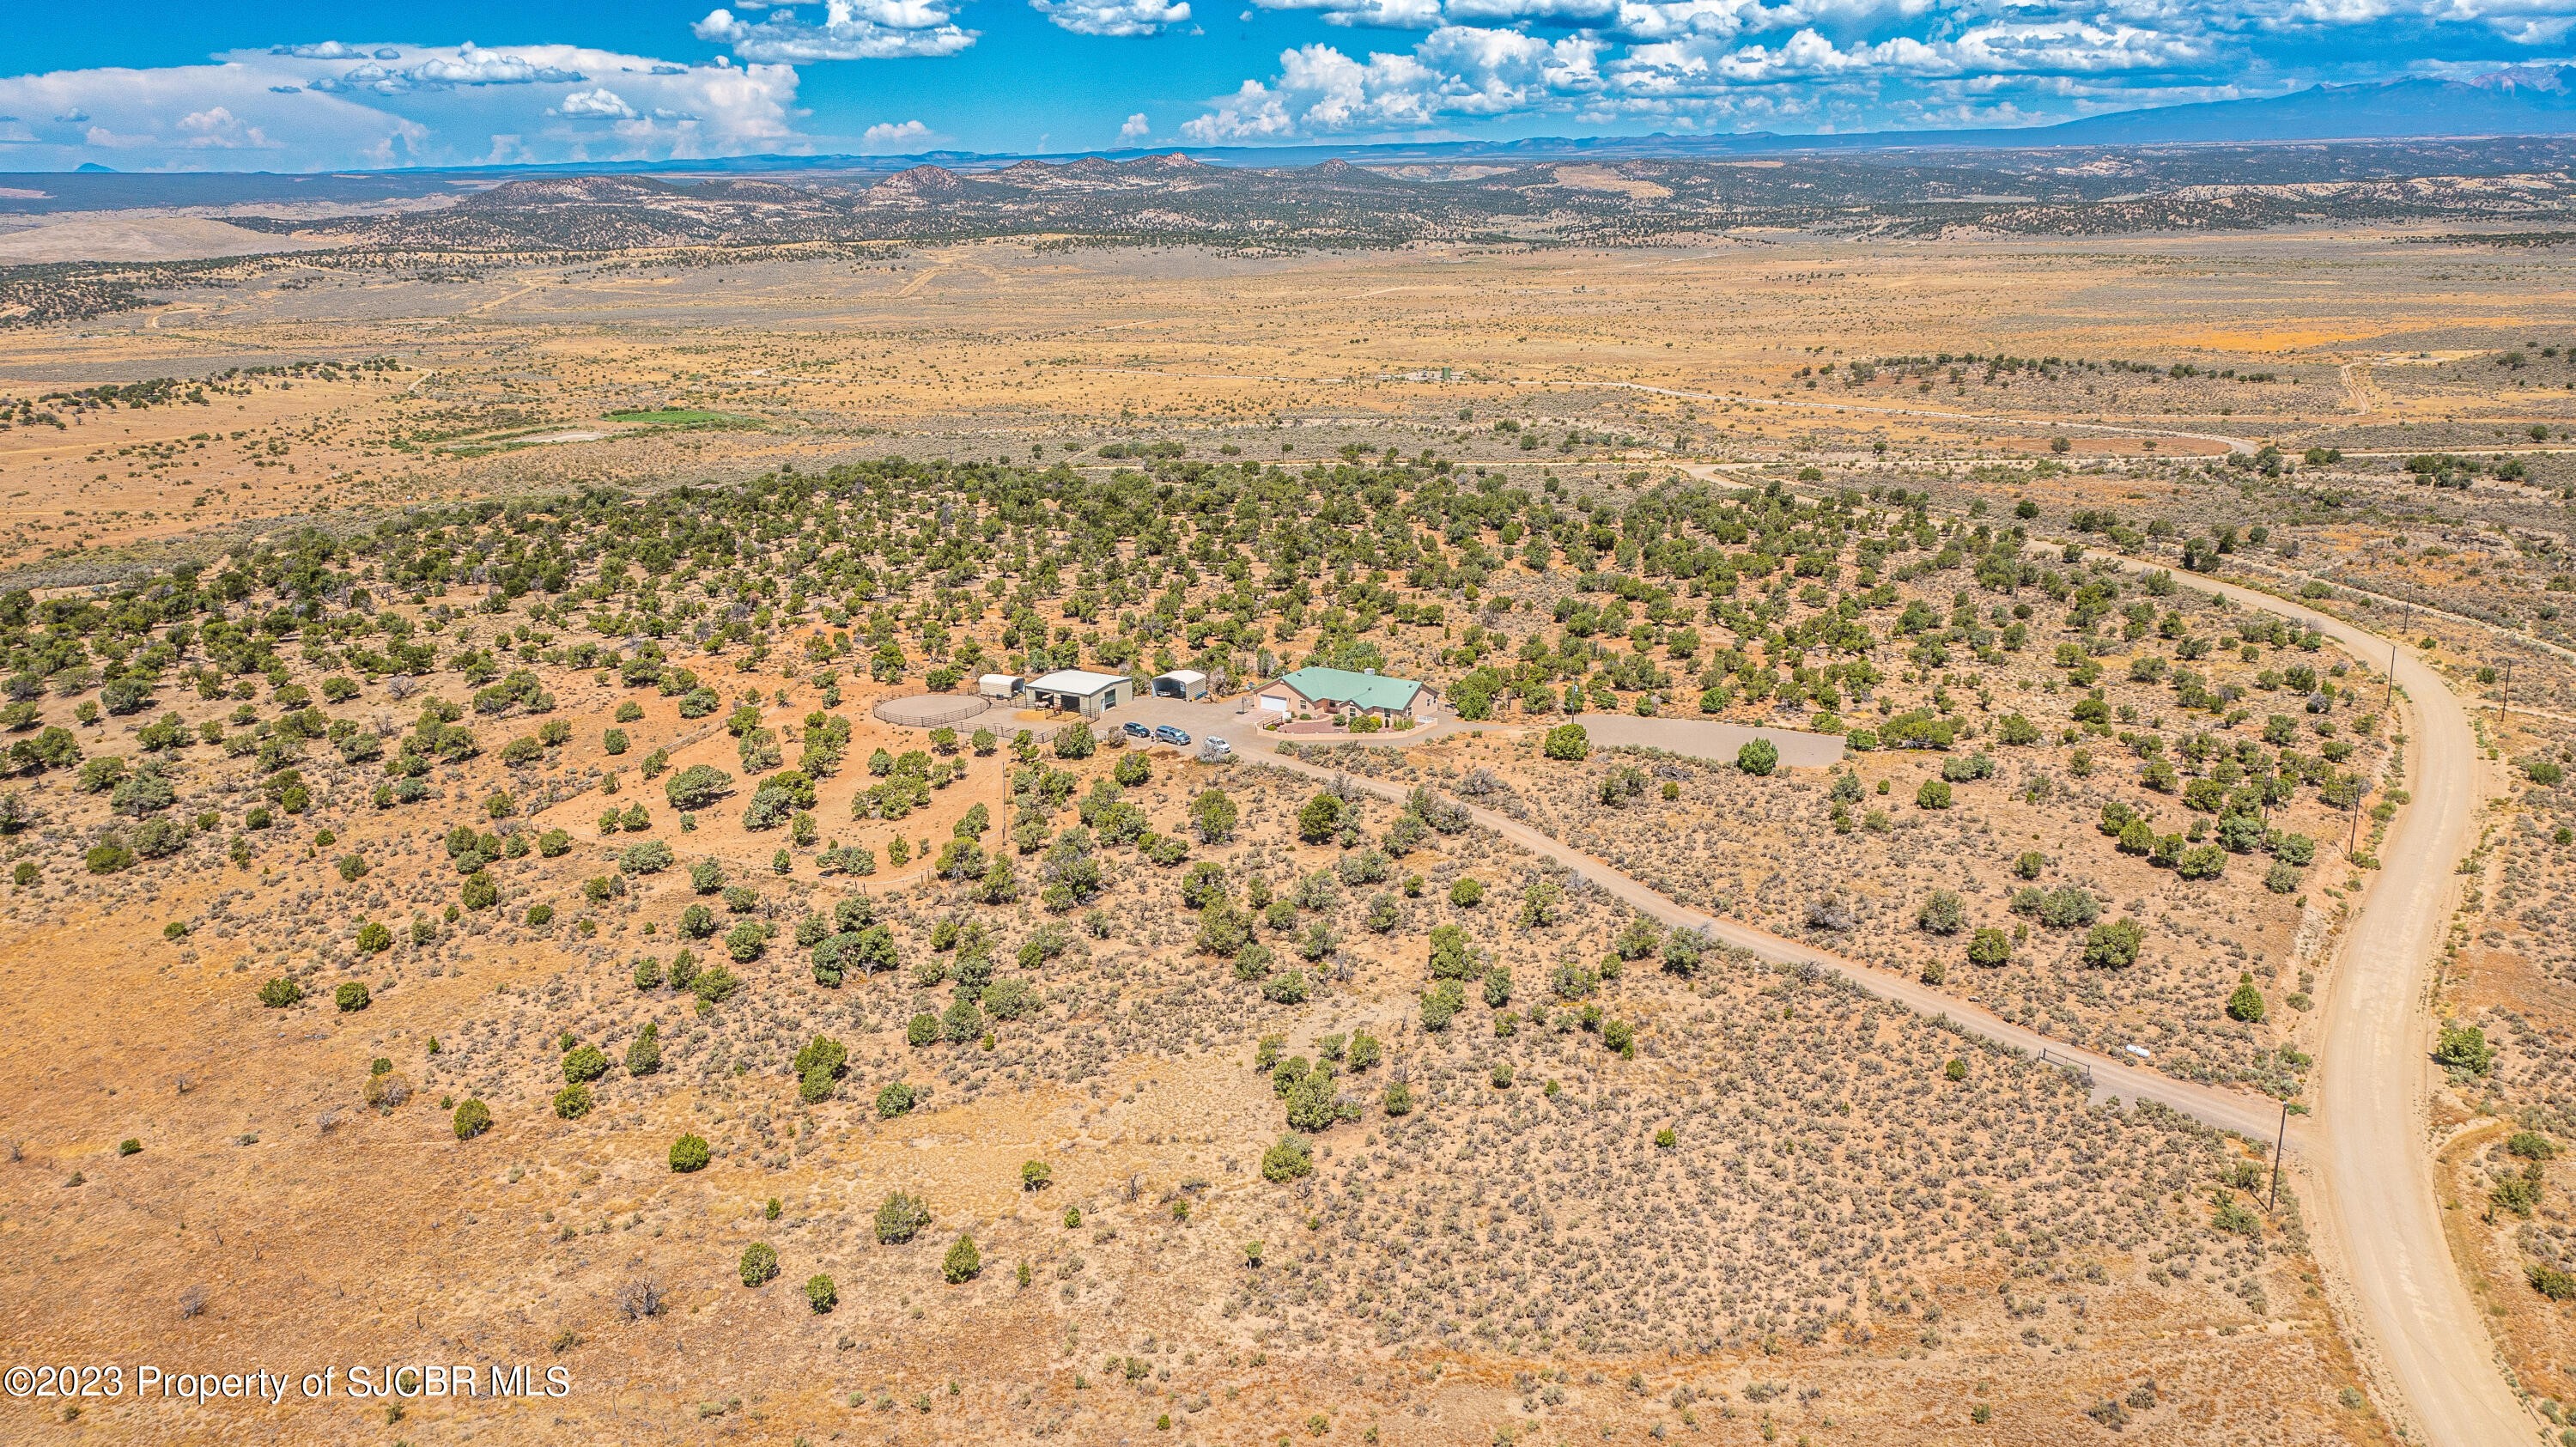 433 ROAD 1350, La Plata, New Mexico, 87418, United States, 3 Bedrooms Bedrooms, ,2 BathroomsBathrooms,Residential,For Sale,433 ROAD 1350,1478699